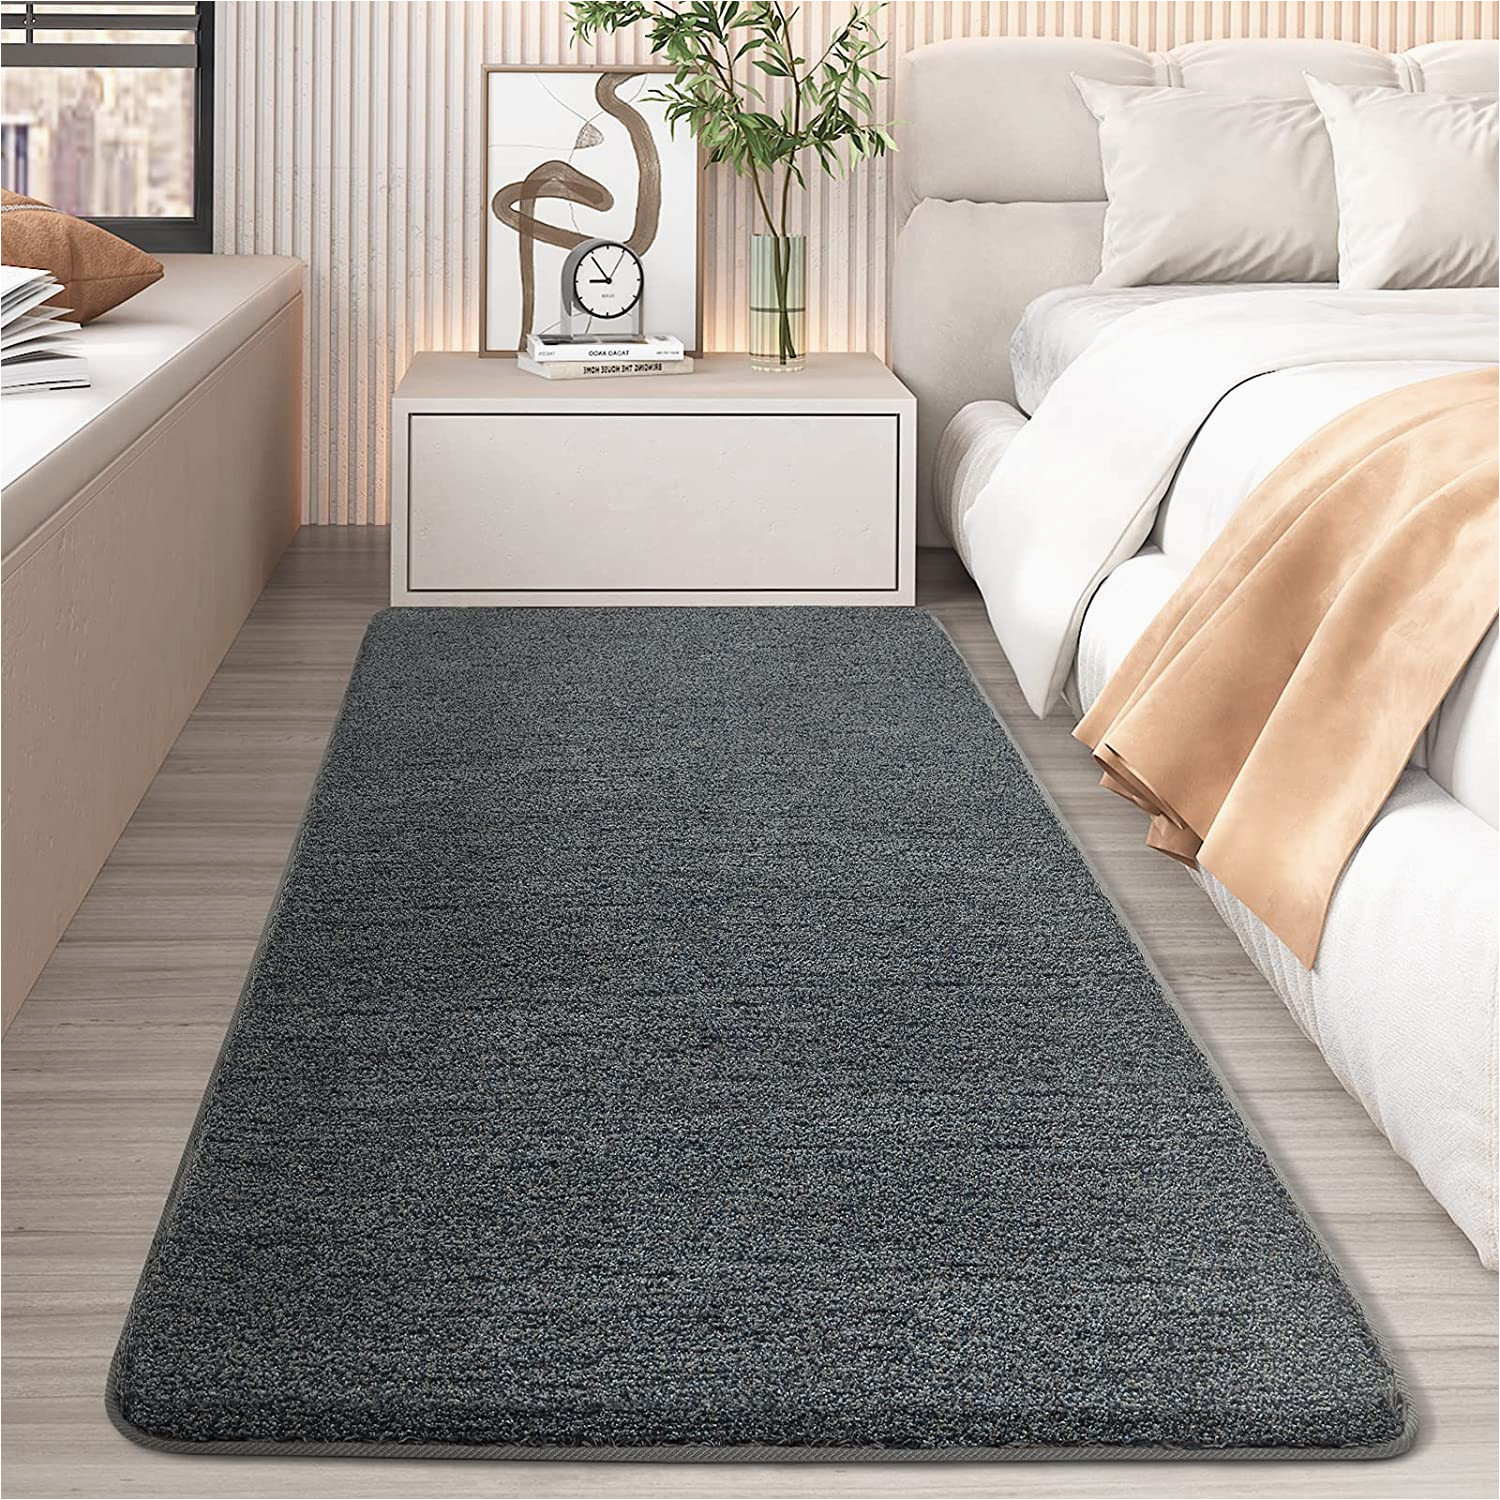 Extra Large area Rugs Near Me Buy Color G area Rugs, Extra Large Size Washable Carpet Mat Living …